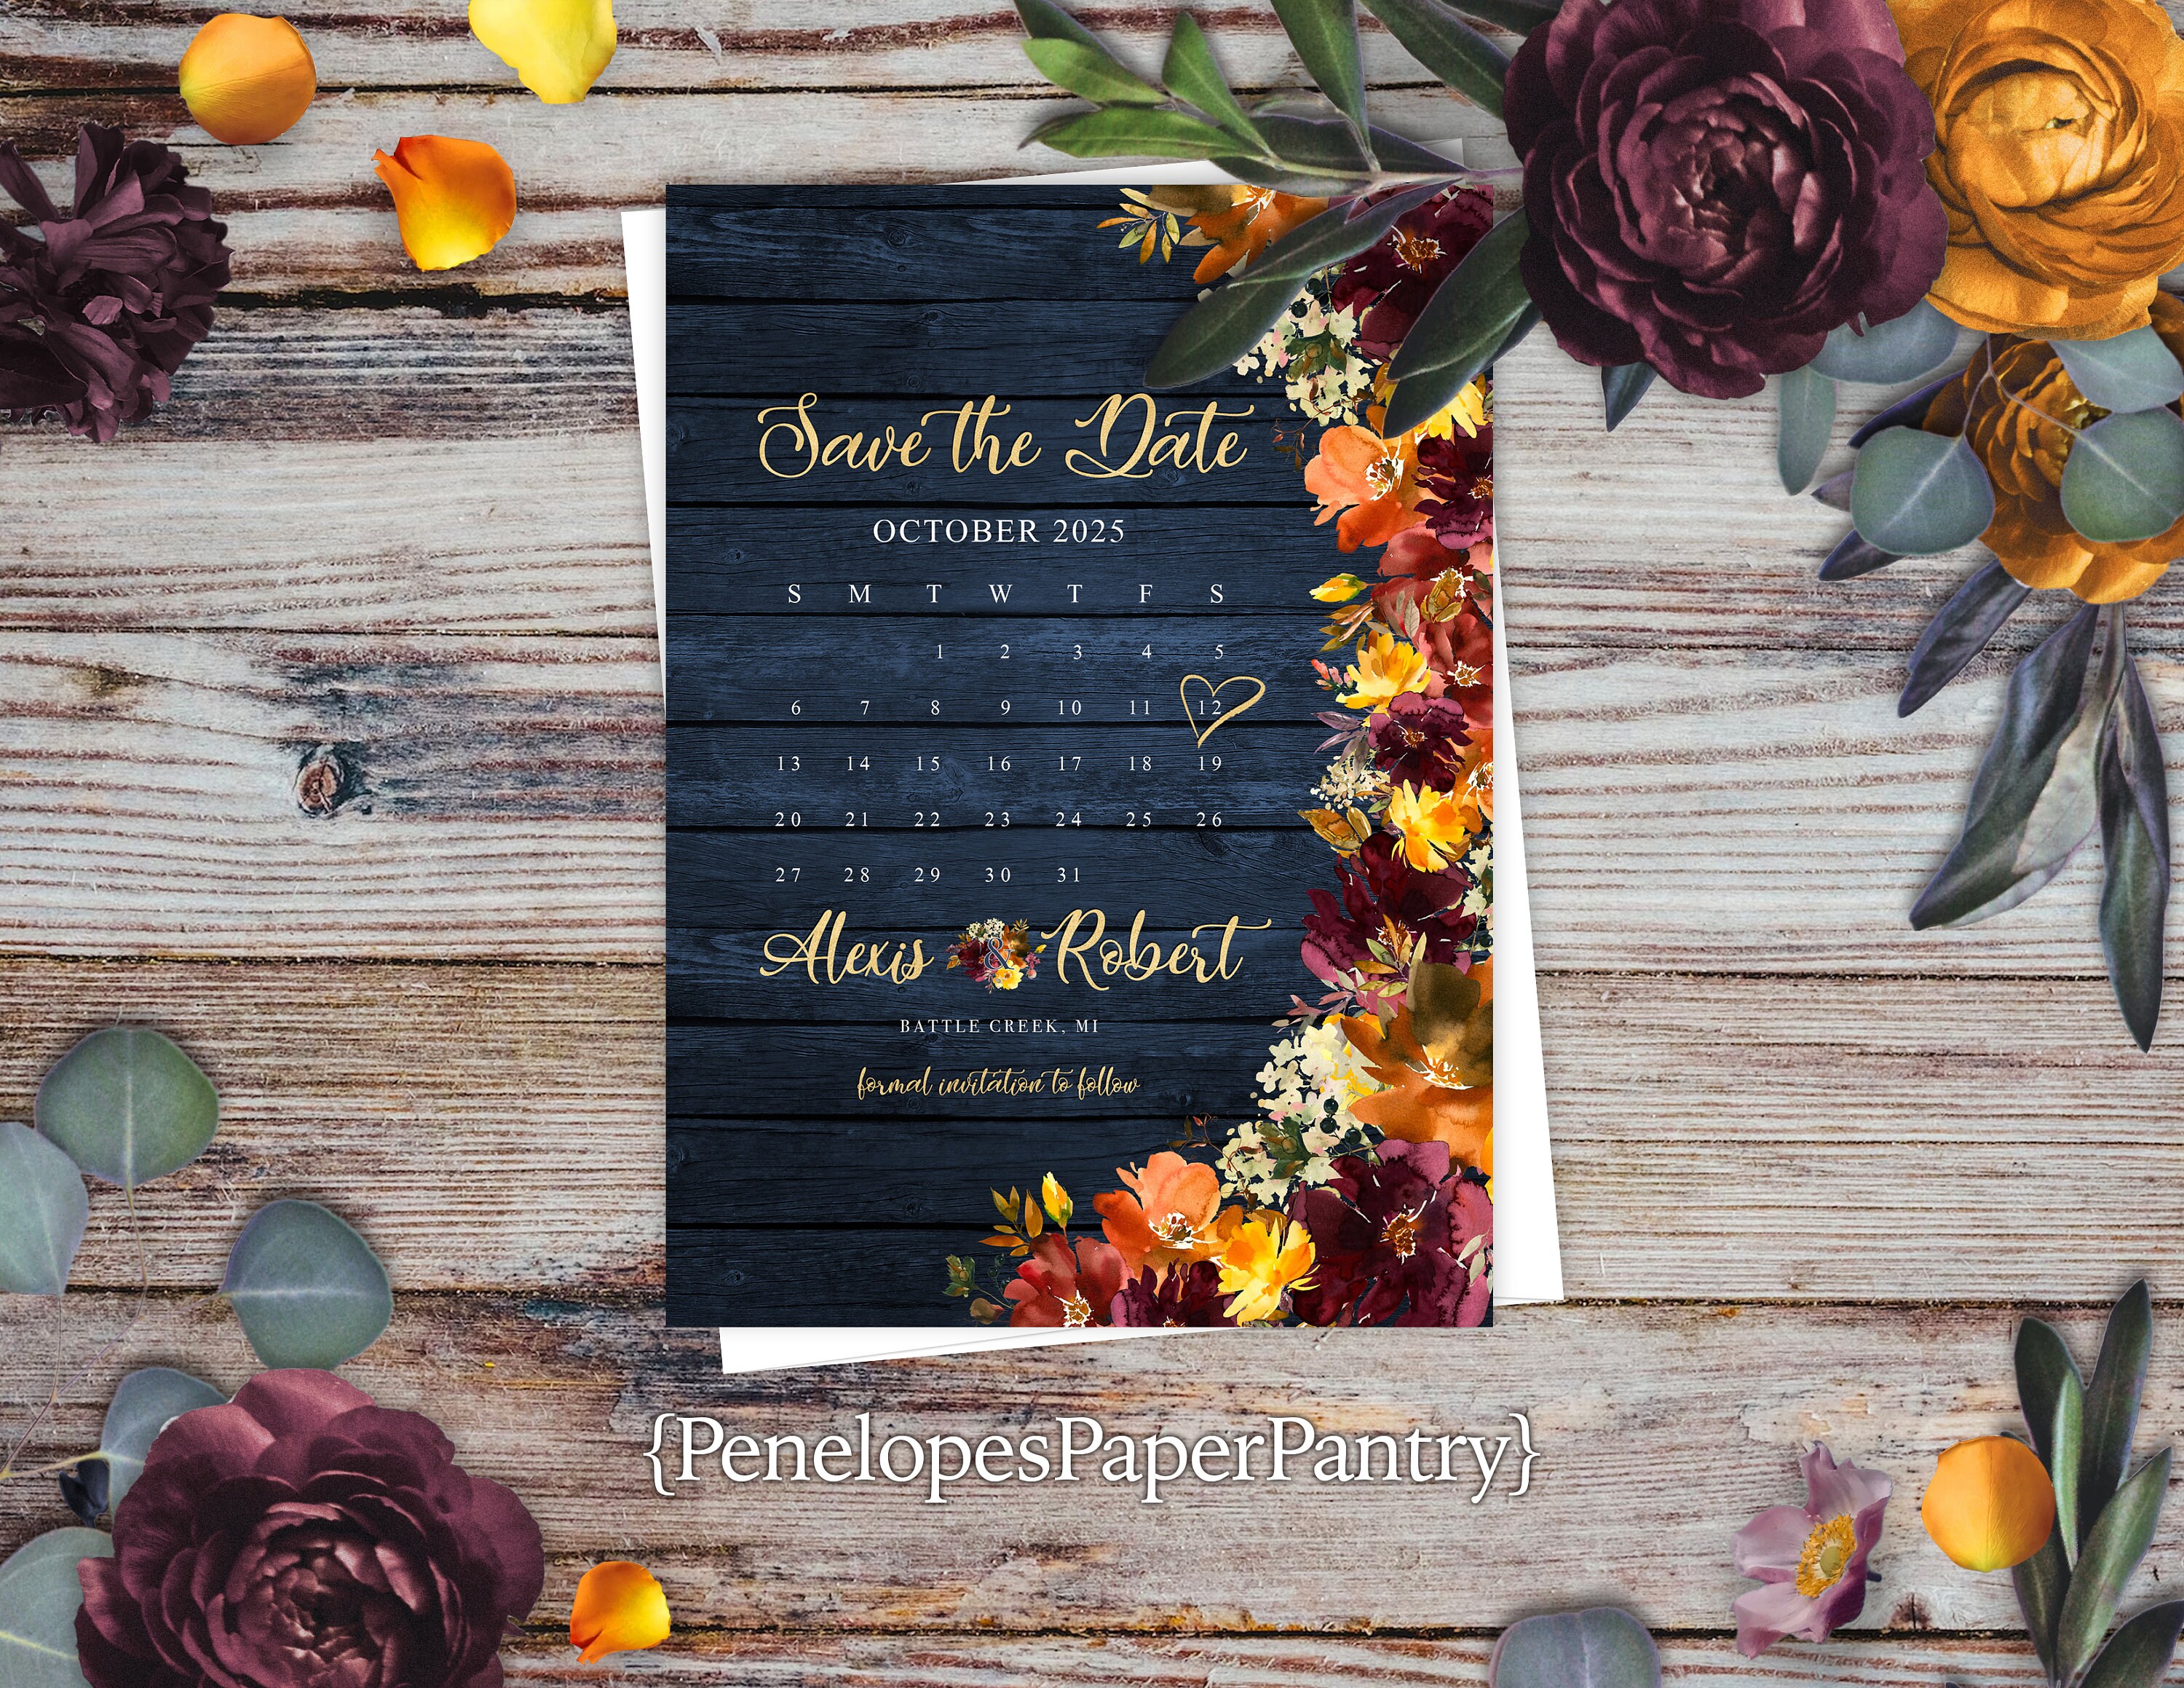 Burgundy Wedding Save the Date Cards, Lace Wedding Save The Dates